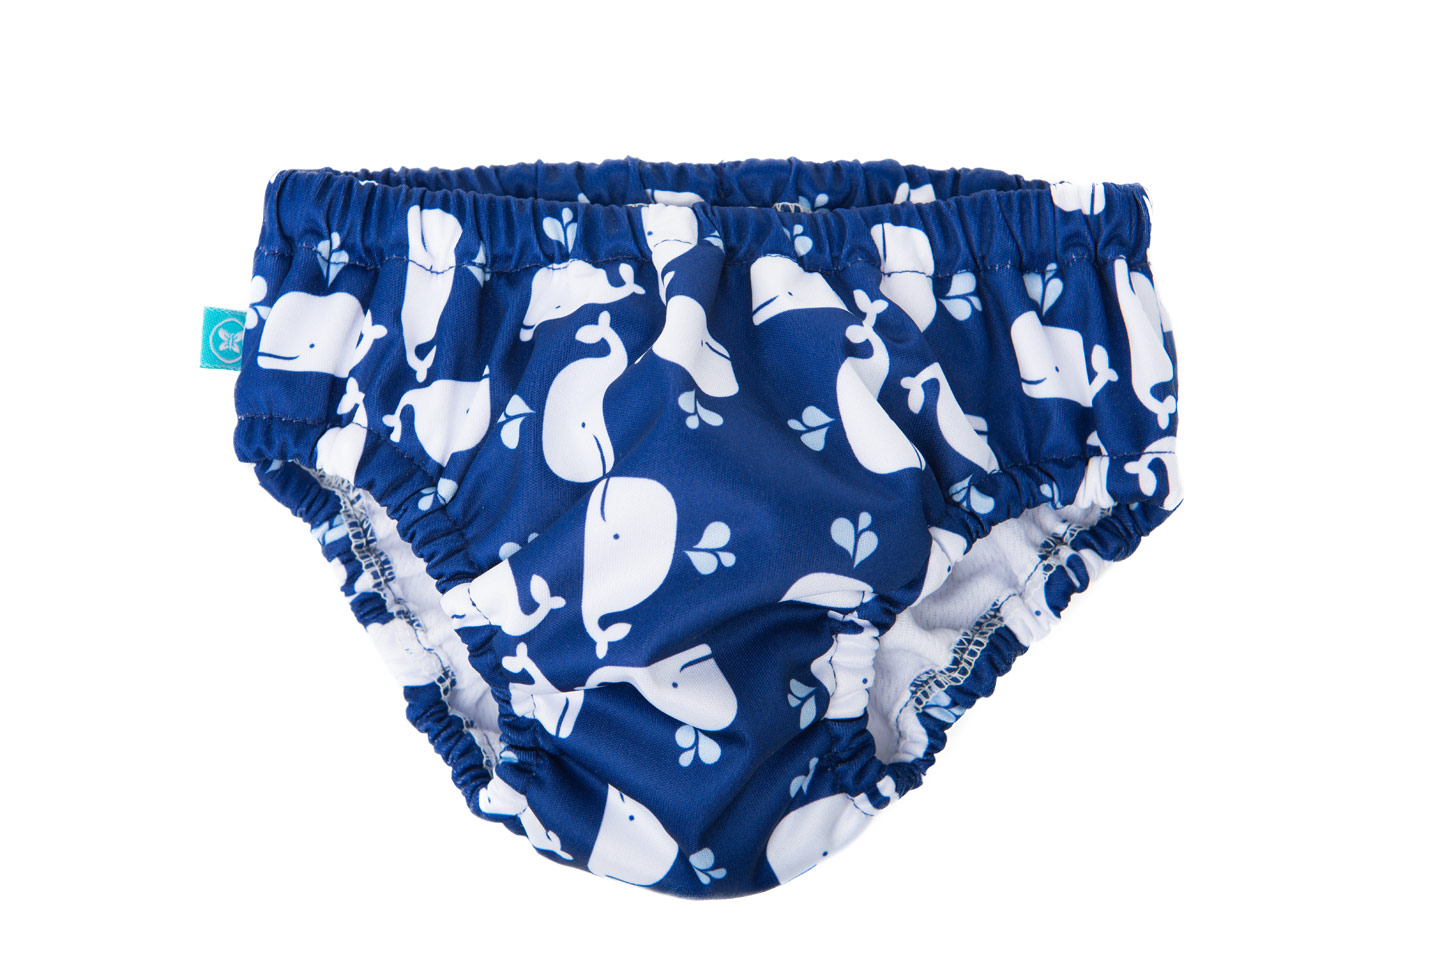 Honest Company reusable cloth swim diaper in white whale print on blue background